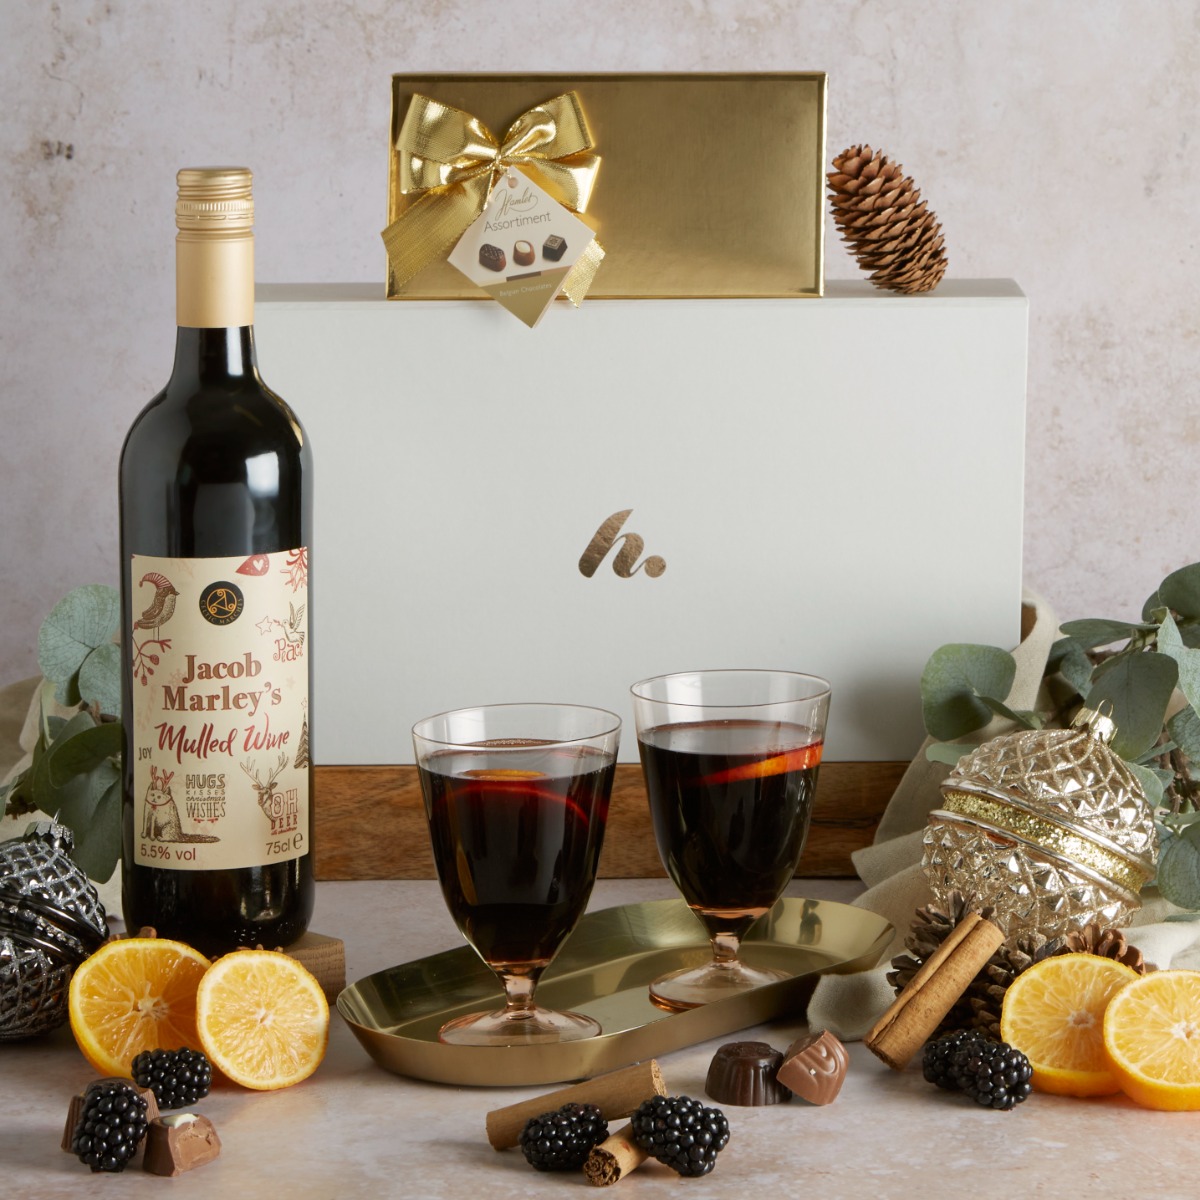 Festive Mulled Wine and Chocolate hampers with contents on display - the perfect Christmas gift for grandad